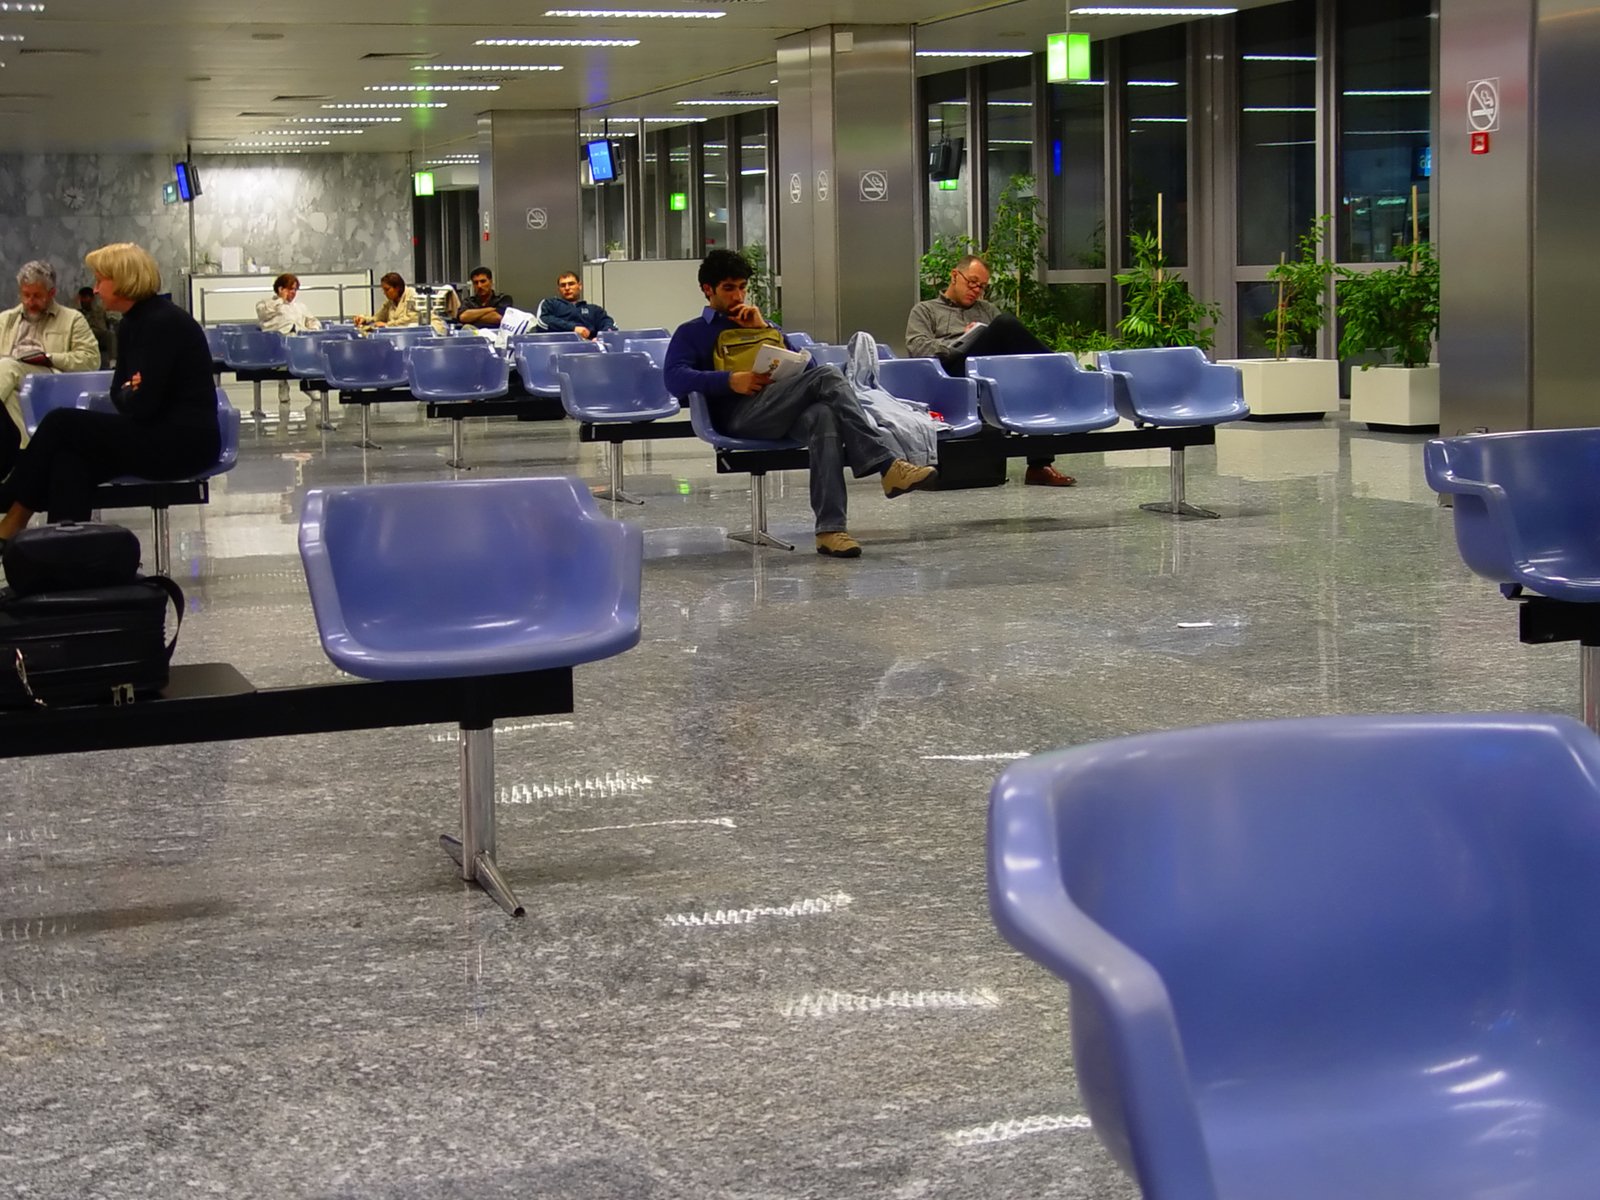 the airport has many blue chairs for waiting people